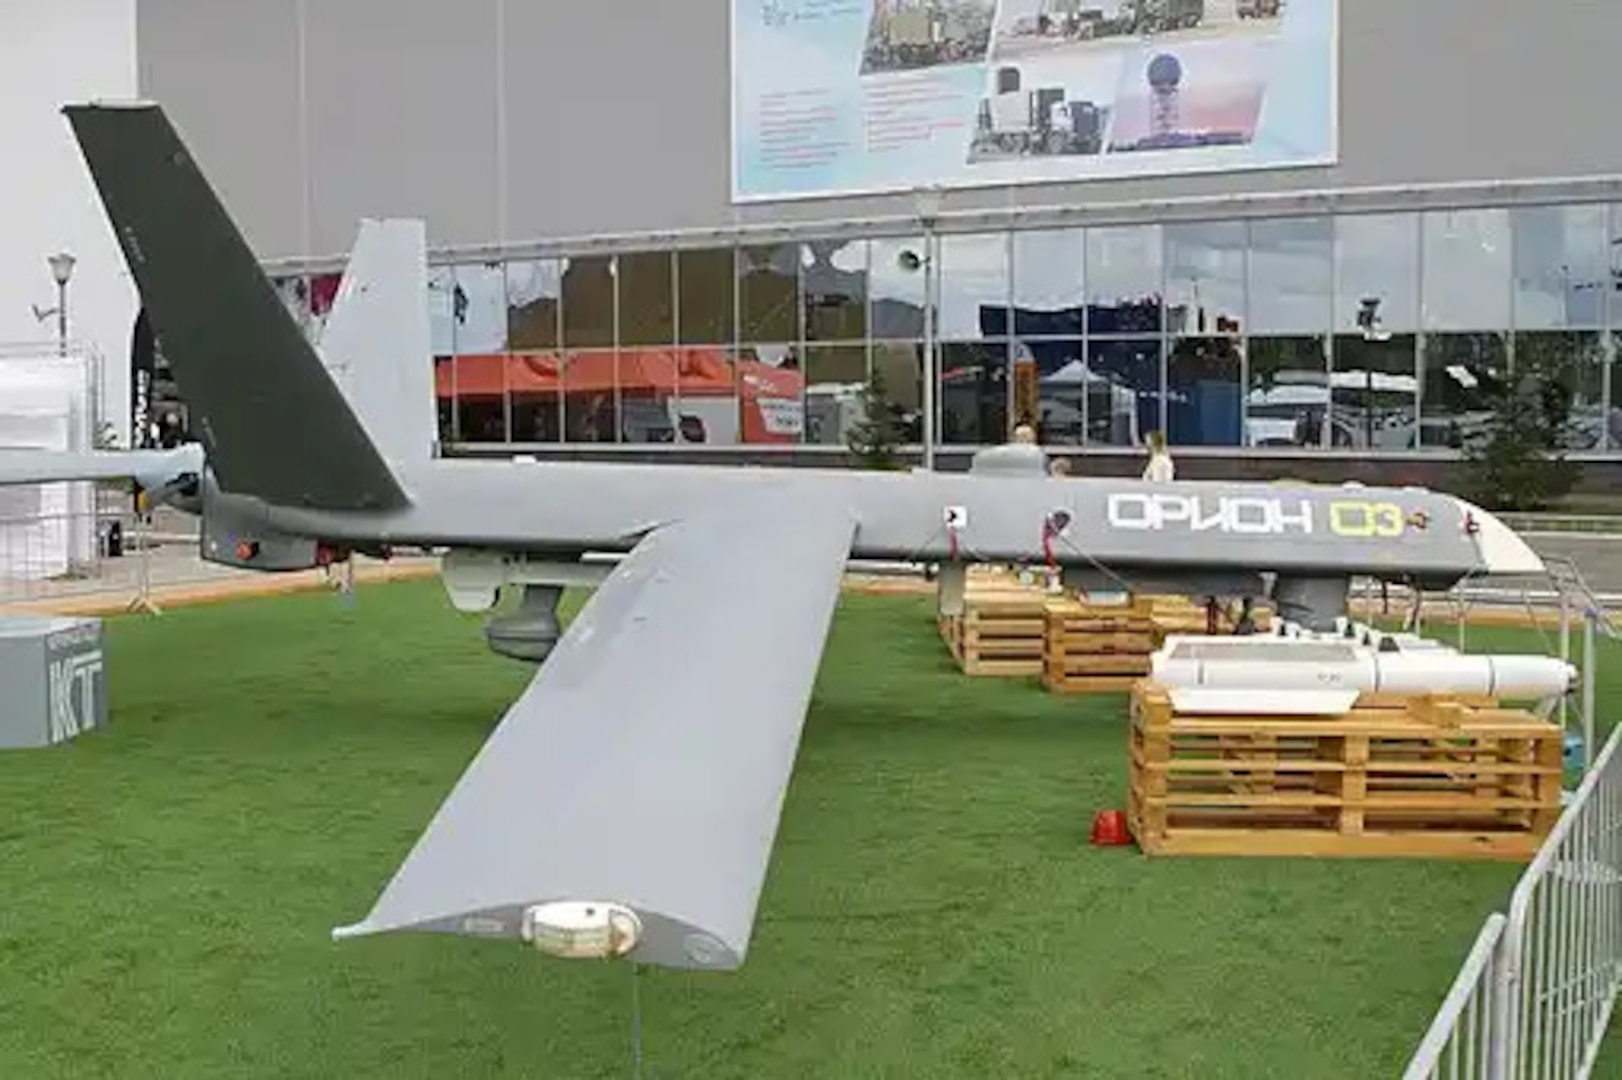 Russia’s Orion UAV (also known as Inokhodets) on display, 29 August 2020